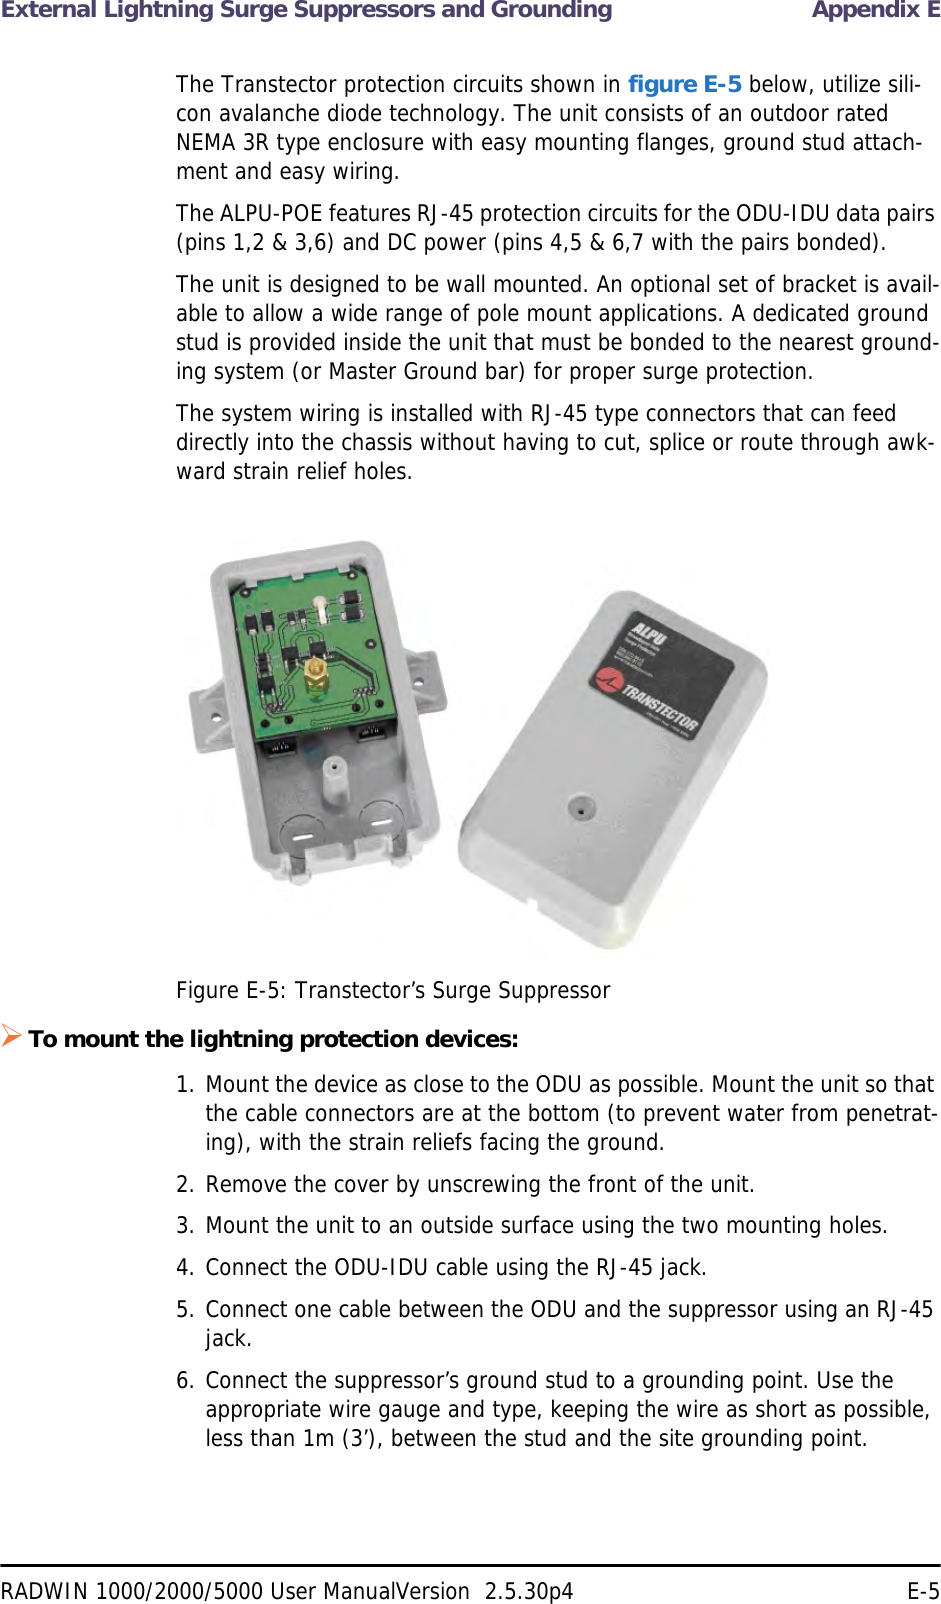 External Lightning Surge Suppressors and Grounding Appendix ERADWIN 1000/2000/5000 User ManualVersion  2.5.30p4 E-5The Transtector protection circuits shown in figure E-5 below, utilize sili-con avalanche diode technology. The unit consists of an outdoor rated NEMA 3R type enclosure with easy mounting flanges, ground stud attach-ment and easy wiring.The ALPU-POE features RJ-45 protection circuits for the ODU-IDU data pairs (pins 1,2 &amp; 3,6) and DC power (pins 4,5 &amp; 6,7 with the pairs bonded).The unit is designed to be wall mounted. An optional set of bracket is avail-able to allow a wide range of pole mount applications. A dedicated ground stud is provided inside the unit that must be bonded to the nearest ground-ing system (or Master Ground bar) for proper surge protection.The system wiring is installed with RJ-45 type connectors that can feed directly into the chassis without having to cut, splice or route through awk-ward strain relief holes.Figure E-5: Transtector’s Surge SuppressorTo mount the lightning protection devices:1. Mount the device as close to the ODU as possible. Mount the unit so that the cable connectors are at the bottom (to prevent water from penetrat-ing), with the strain reliefs facing the ground.2. Remove the cover by unscrewing the front of the unit.3. Mount the unit to an outside surface using the two mounting holes.4. Connect the ODU-IDU cable using the RJ-45 jack.5. Connect one cable between the ODU and the suppressor using an RJ-45 jack.6. Connect the suppressor’s ground stud to a grounding point. Use the appropriate wire gauge and type, keeping the wire as short as possible, less than 1m (3’), between the stud and the site grounding point.